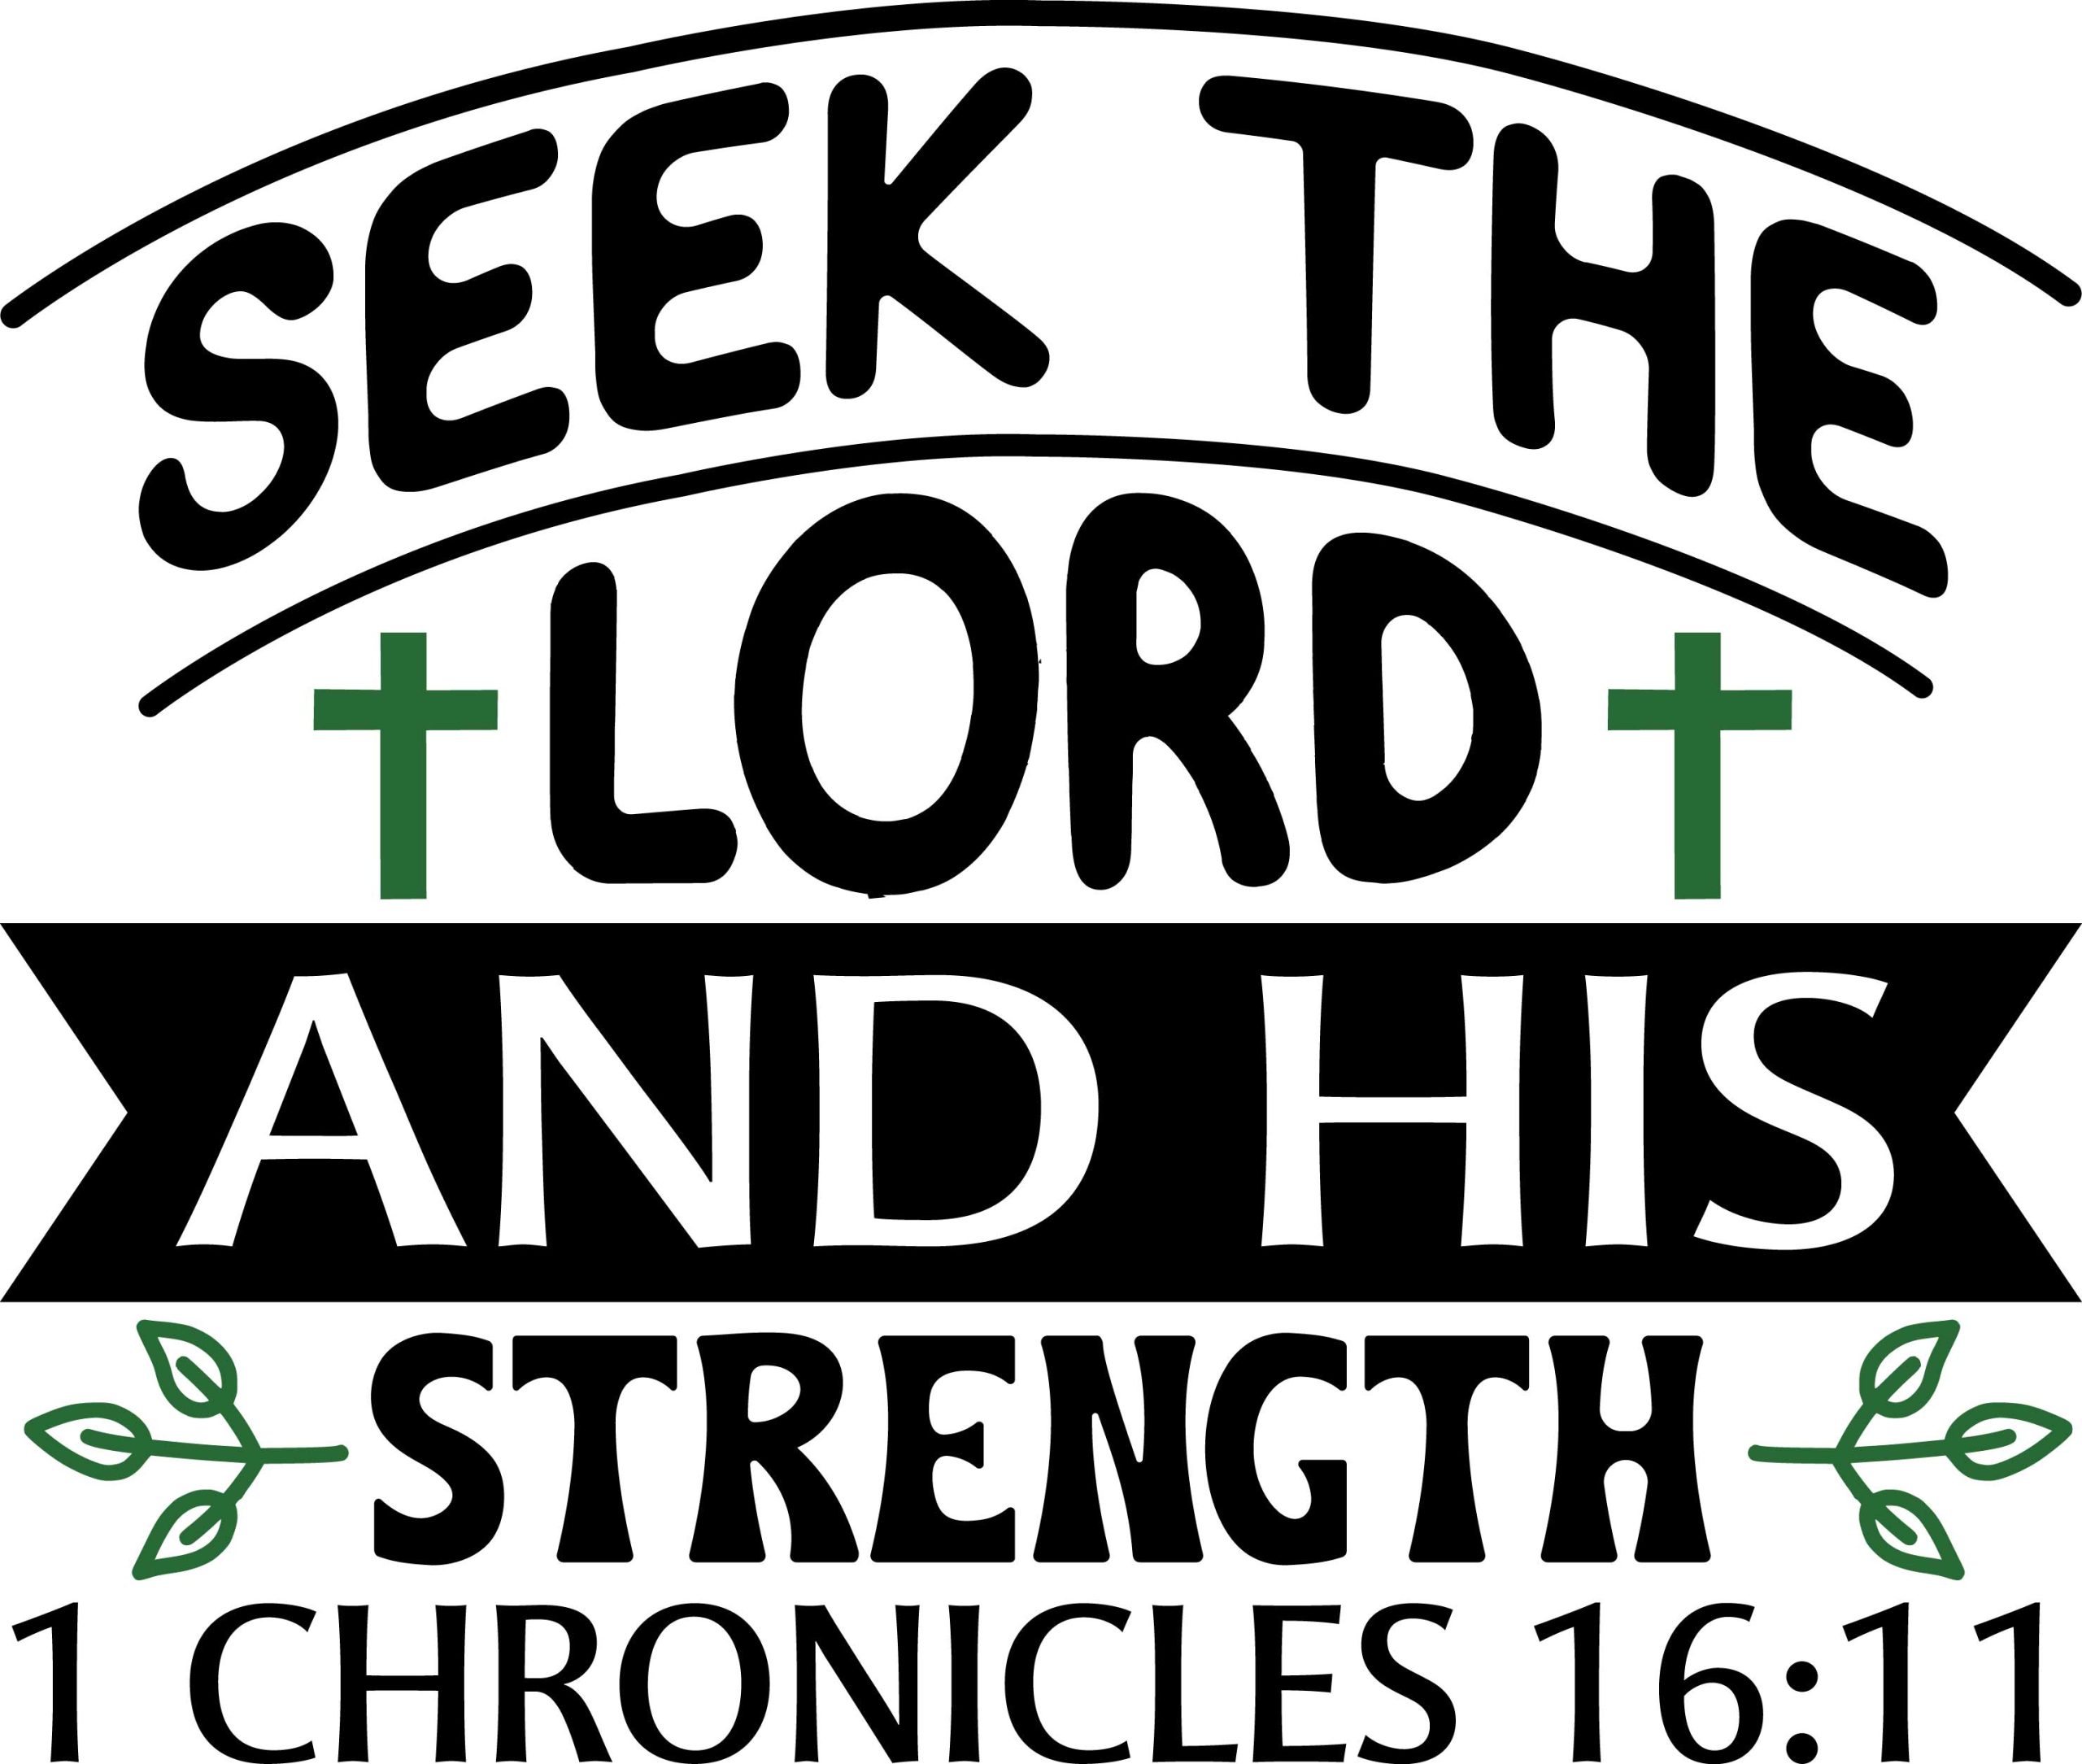 Seek the lord and his strength 1 Chronicles 16:11, bible verses, scripture verses, svg files, passages, sayings, cricut designs, silhouette, embroidery, bundle, free cut files, design space, vector